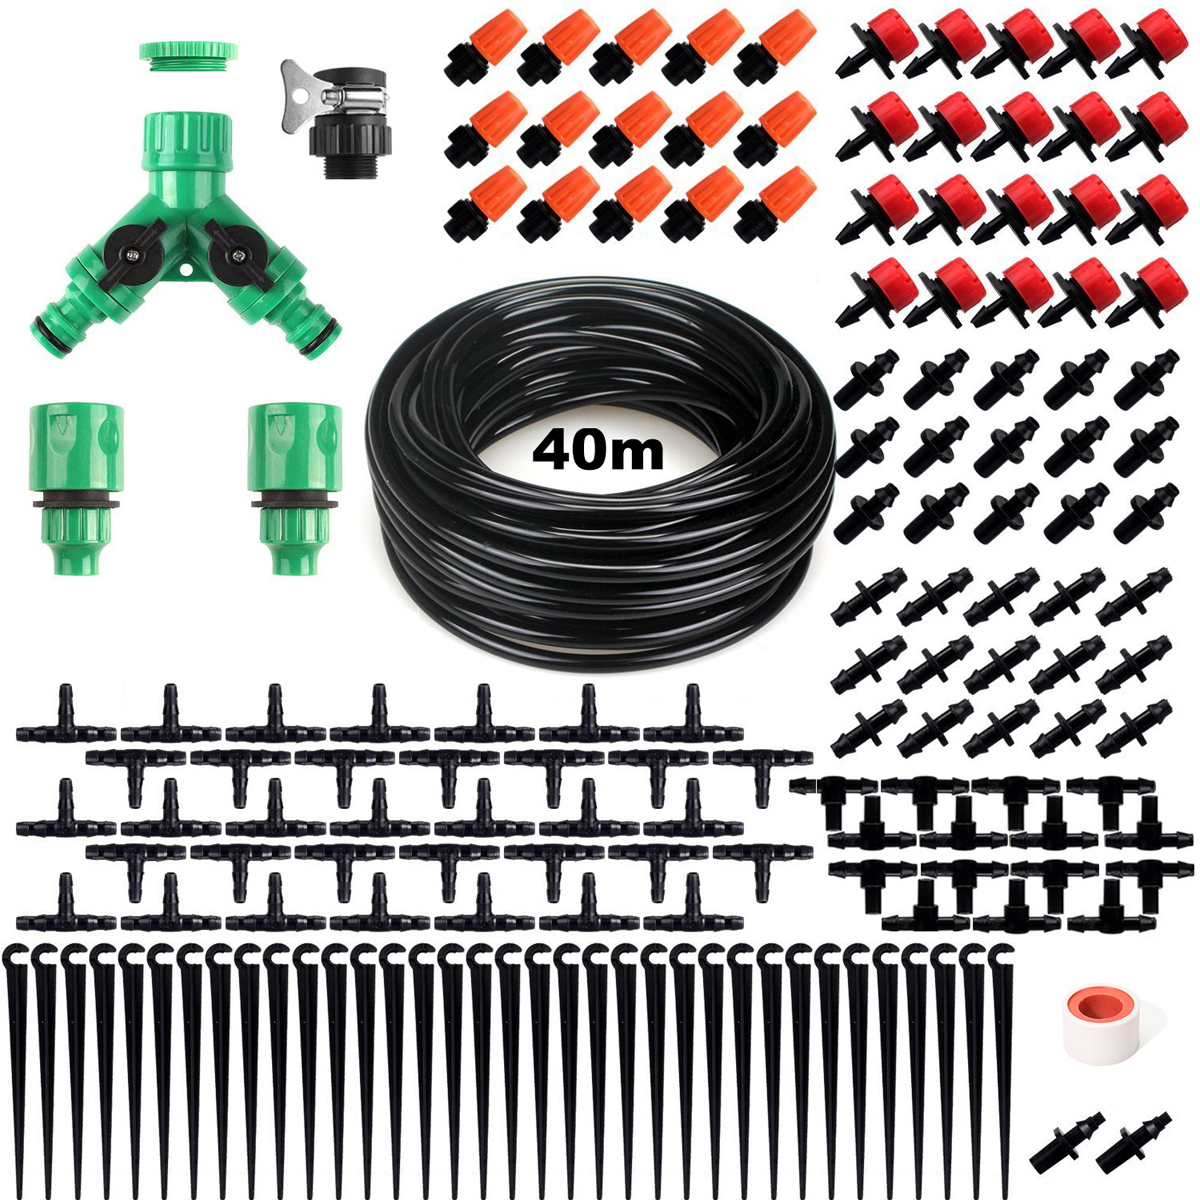 DIY-40M-Micro-Drip-Irrigation-System-Agriculture-Sprinkler-Garden-Plant-Flower-Automatic-Watering-To-1451058-2